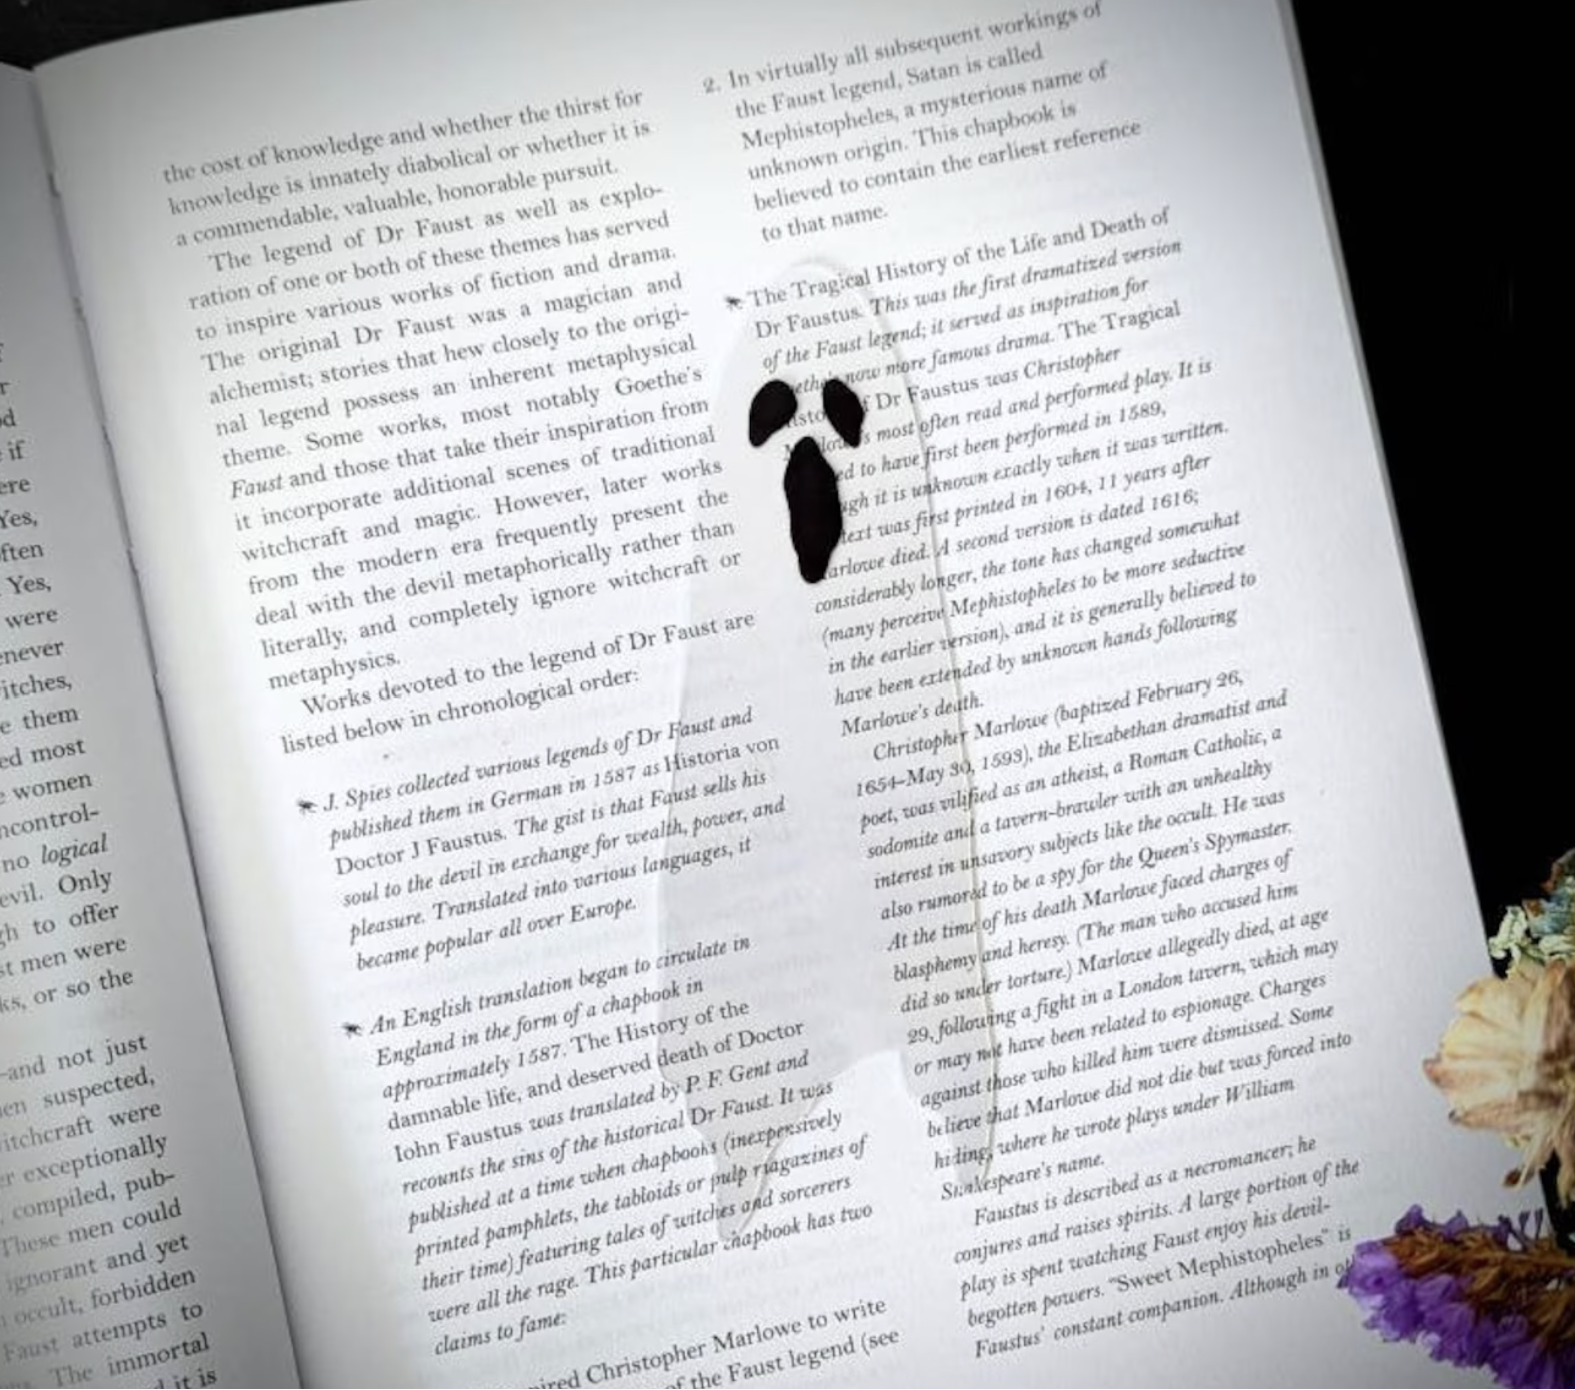 A see-through ghost bookmark with gaping black mouth and black eyes rests on a book. The text of the book can be seen through the ghost bookmark. 